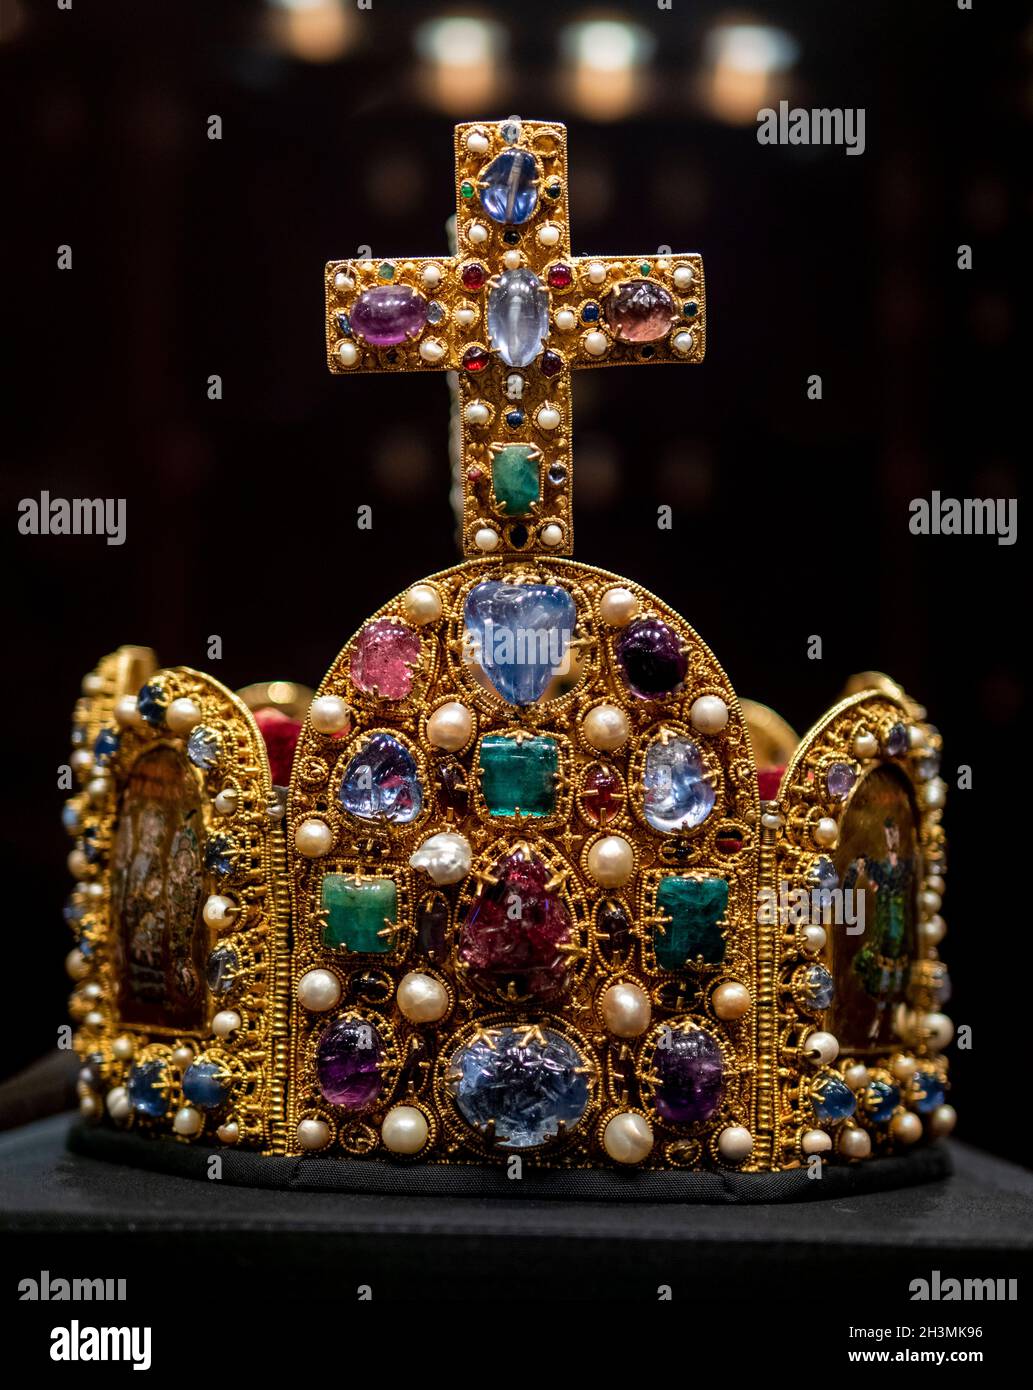 Imperial Crown of the Holy Roman Empire: This heavily jewel encrusted coronation crown was once belived to be the crown of Charlemagne but it was made in the 10th century (c. 962),  150 years after his death. Stock Photo